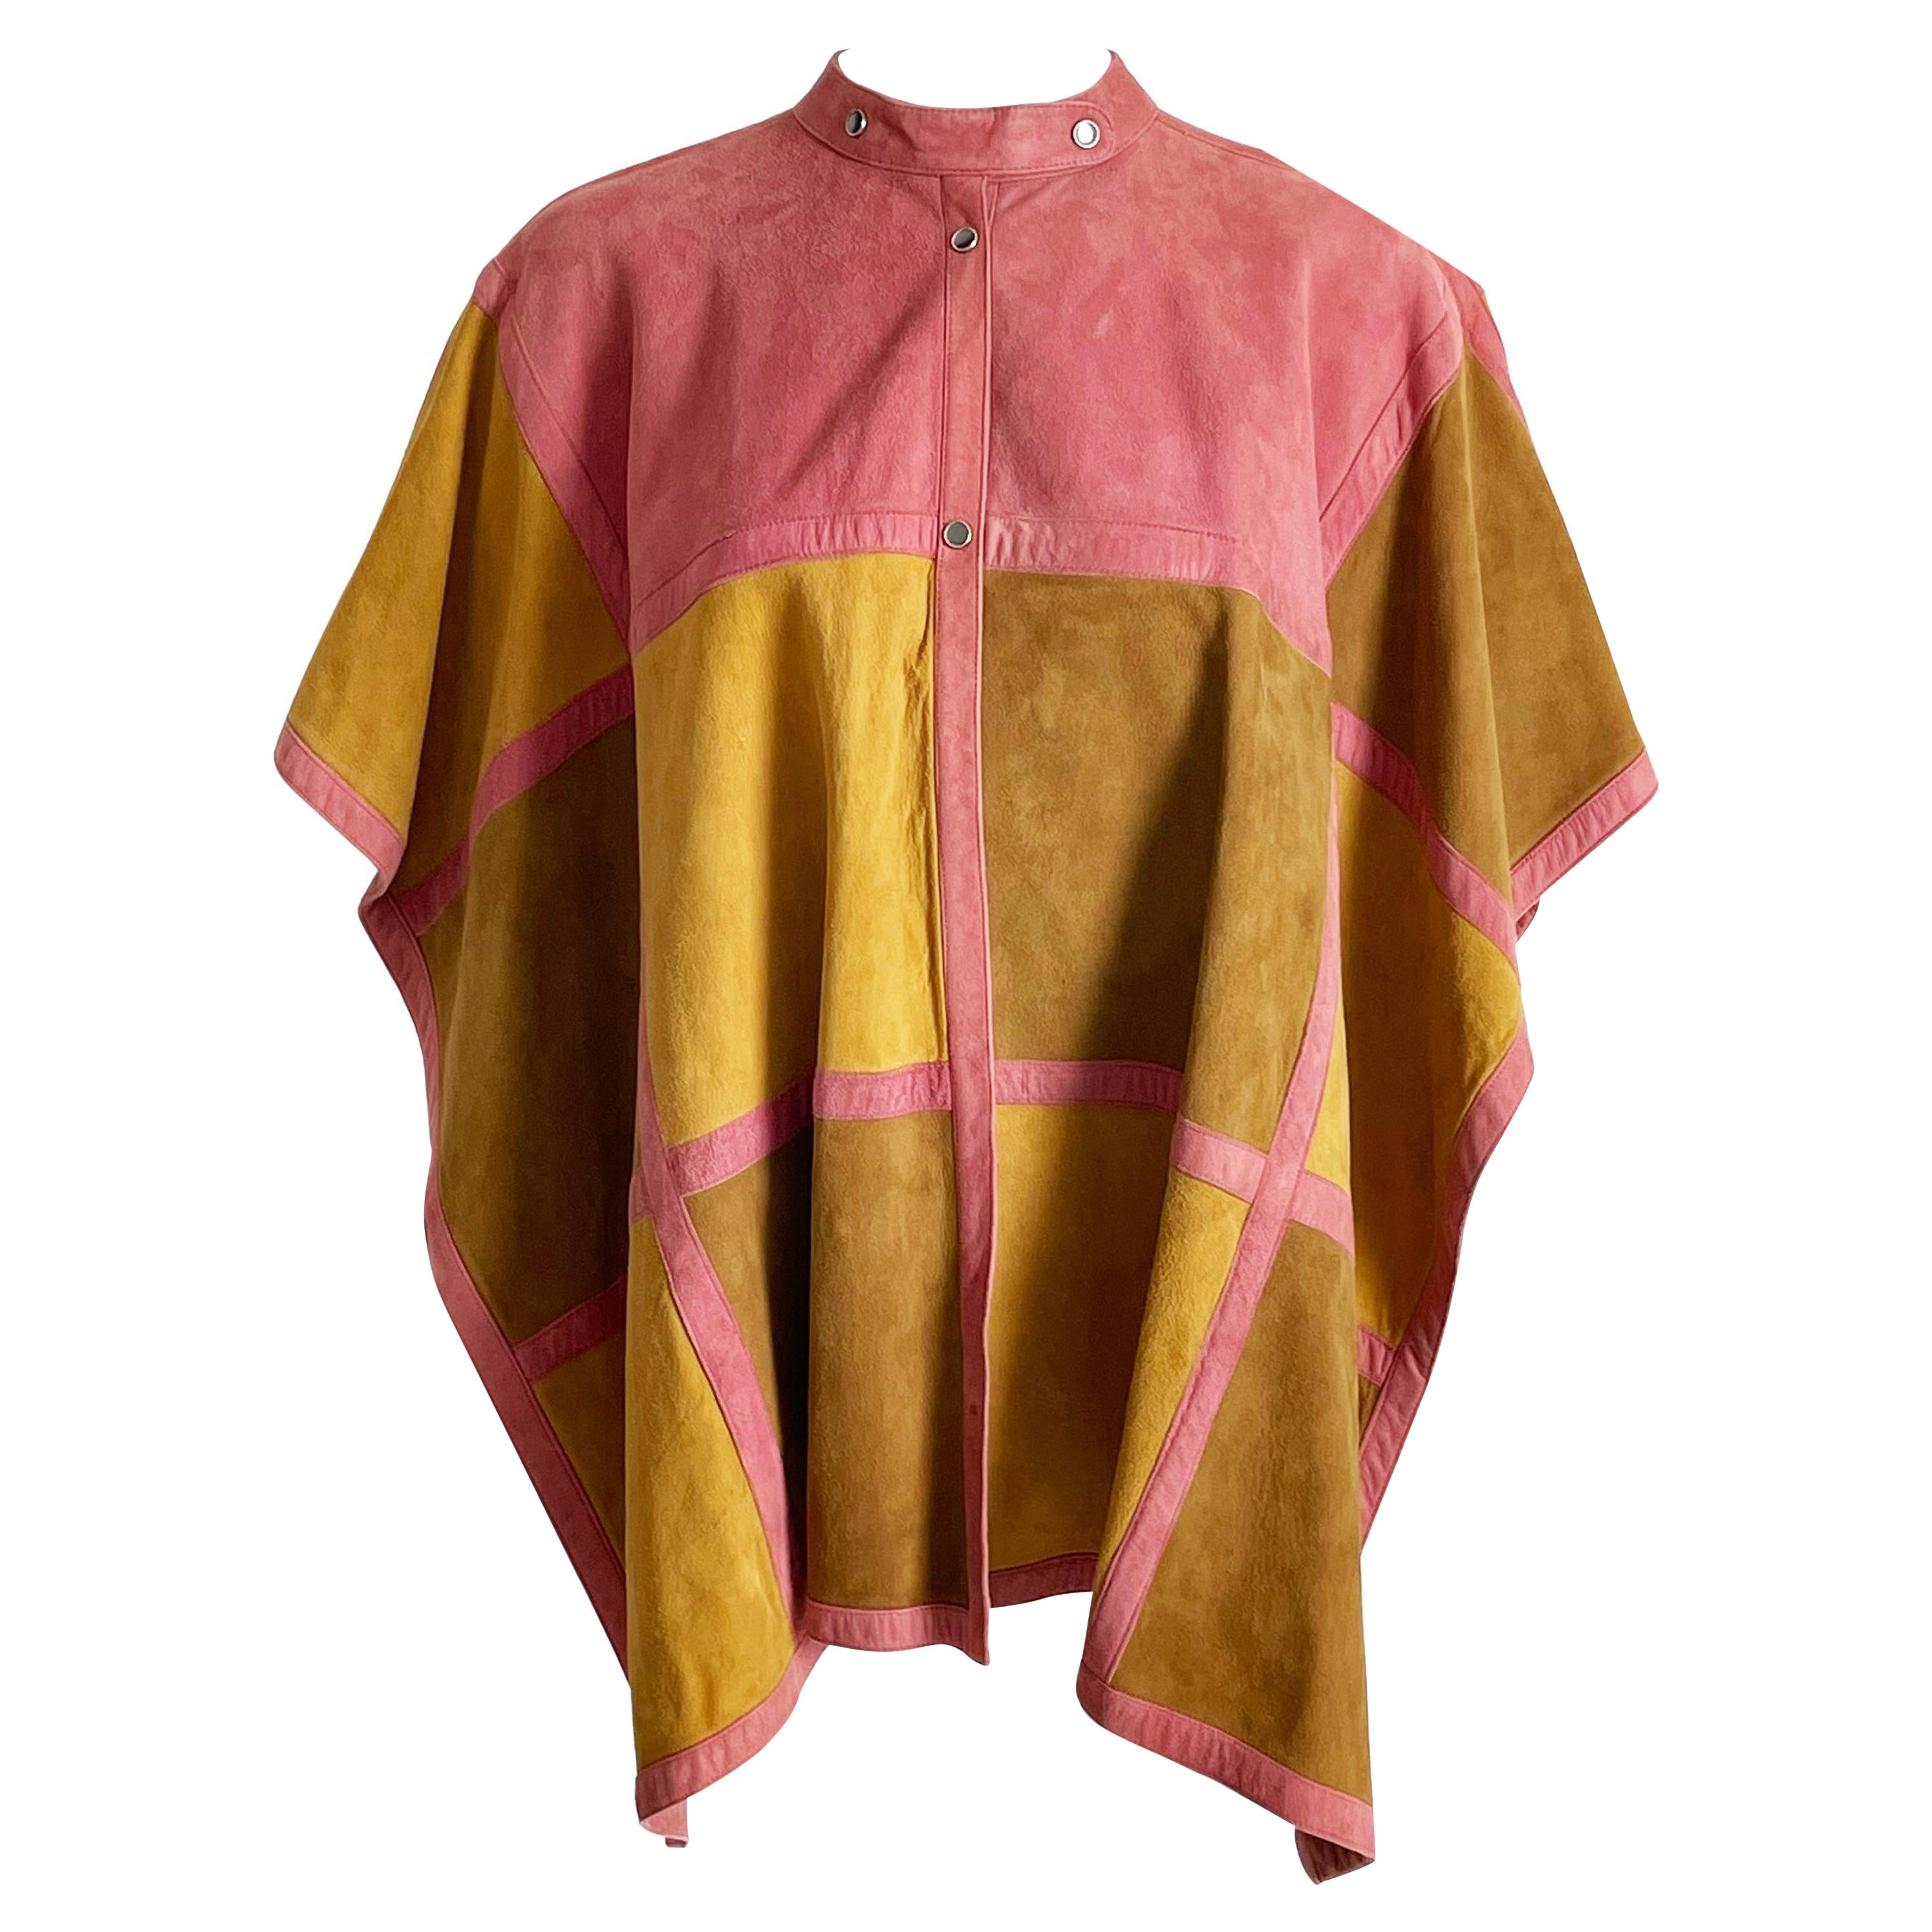 Bonnie Cashin for Sills Poncho Cape Suede Patchwork Pink Olive Vintage 70s S/M For Sale